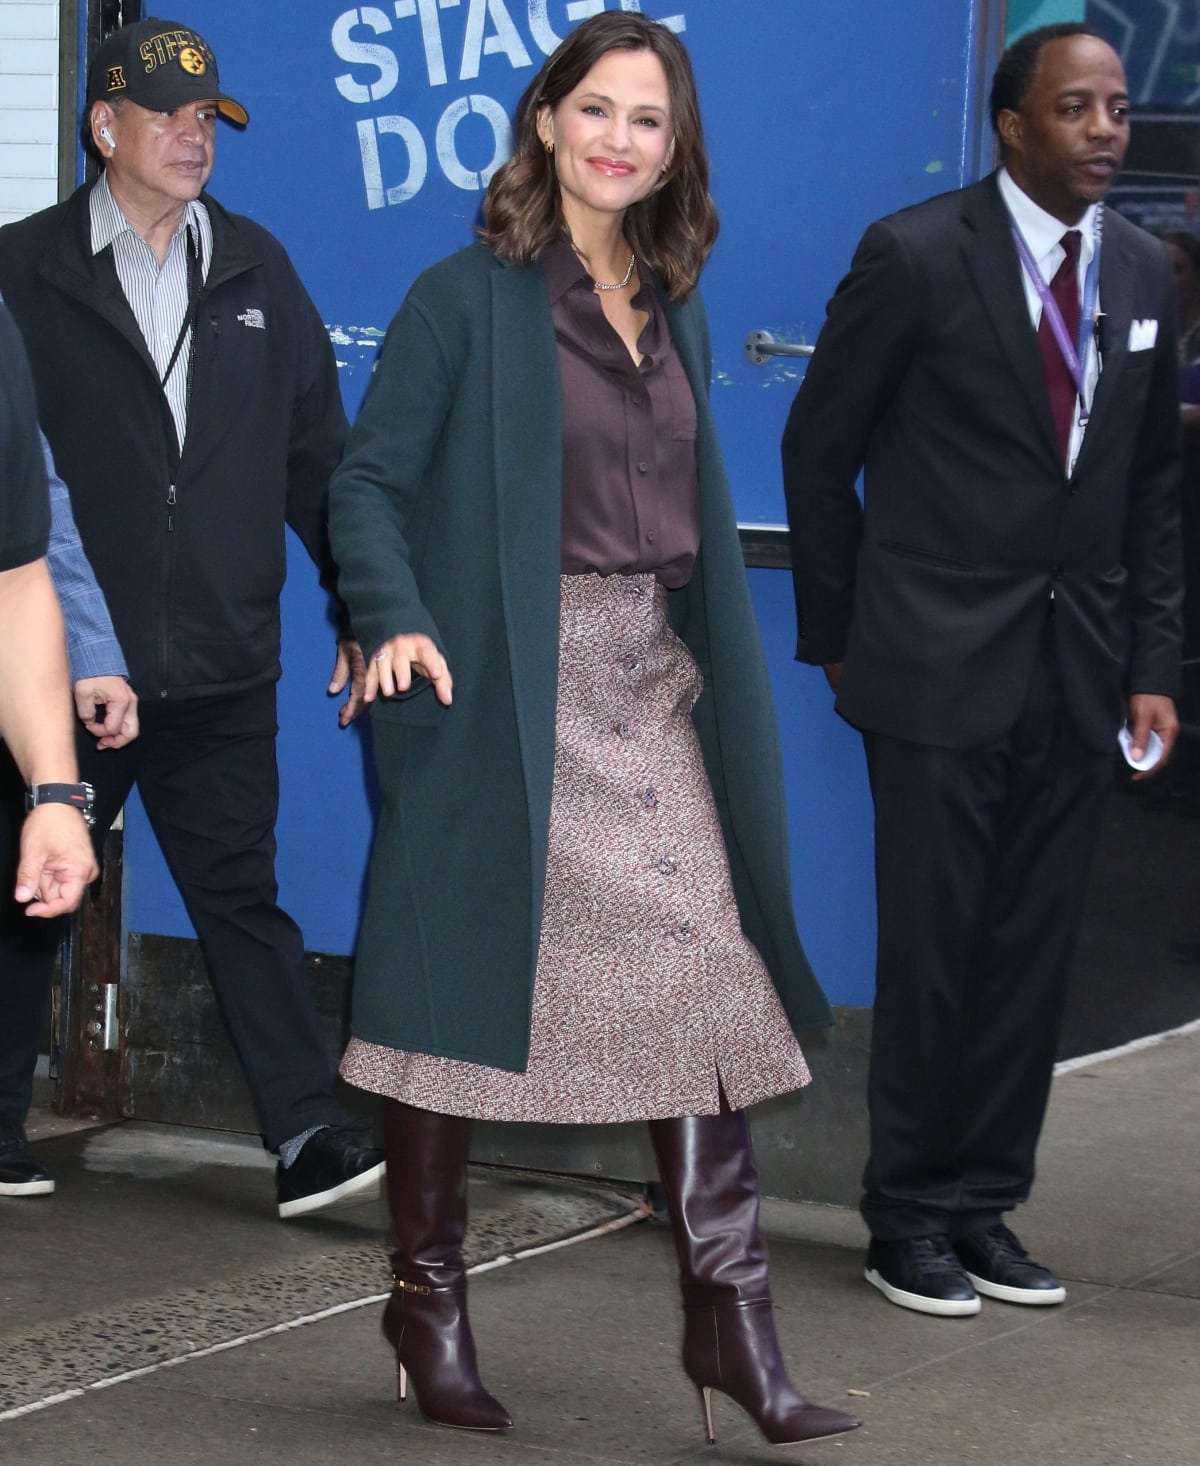 Jennifer Garner wearing a pair of brown knee-high boots to complement her fall-themed ensemble